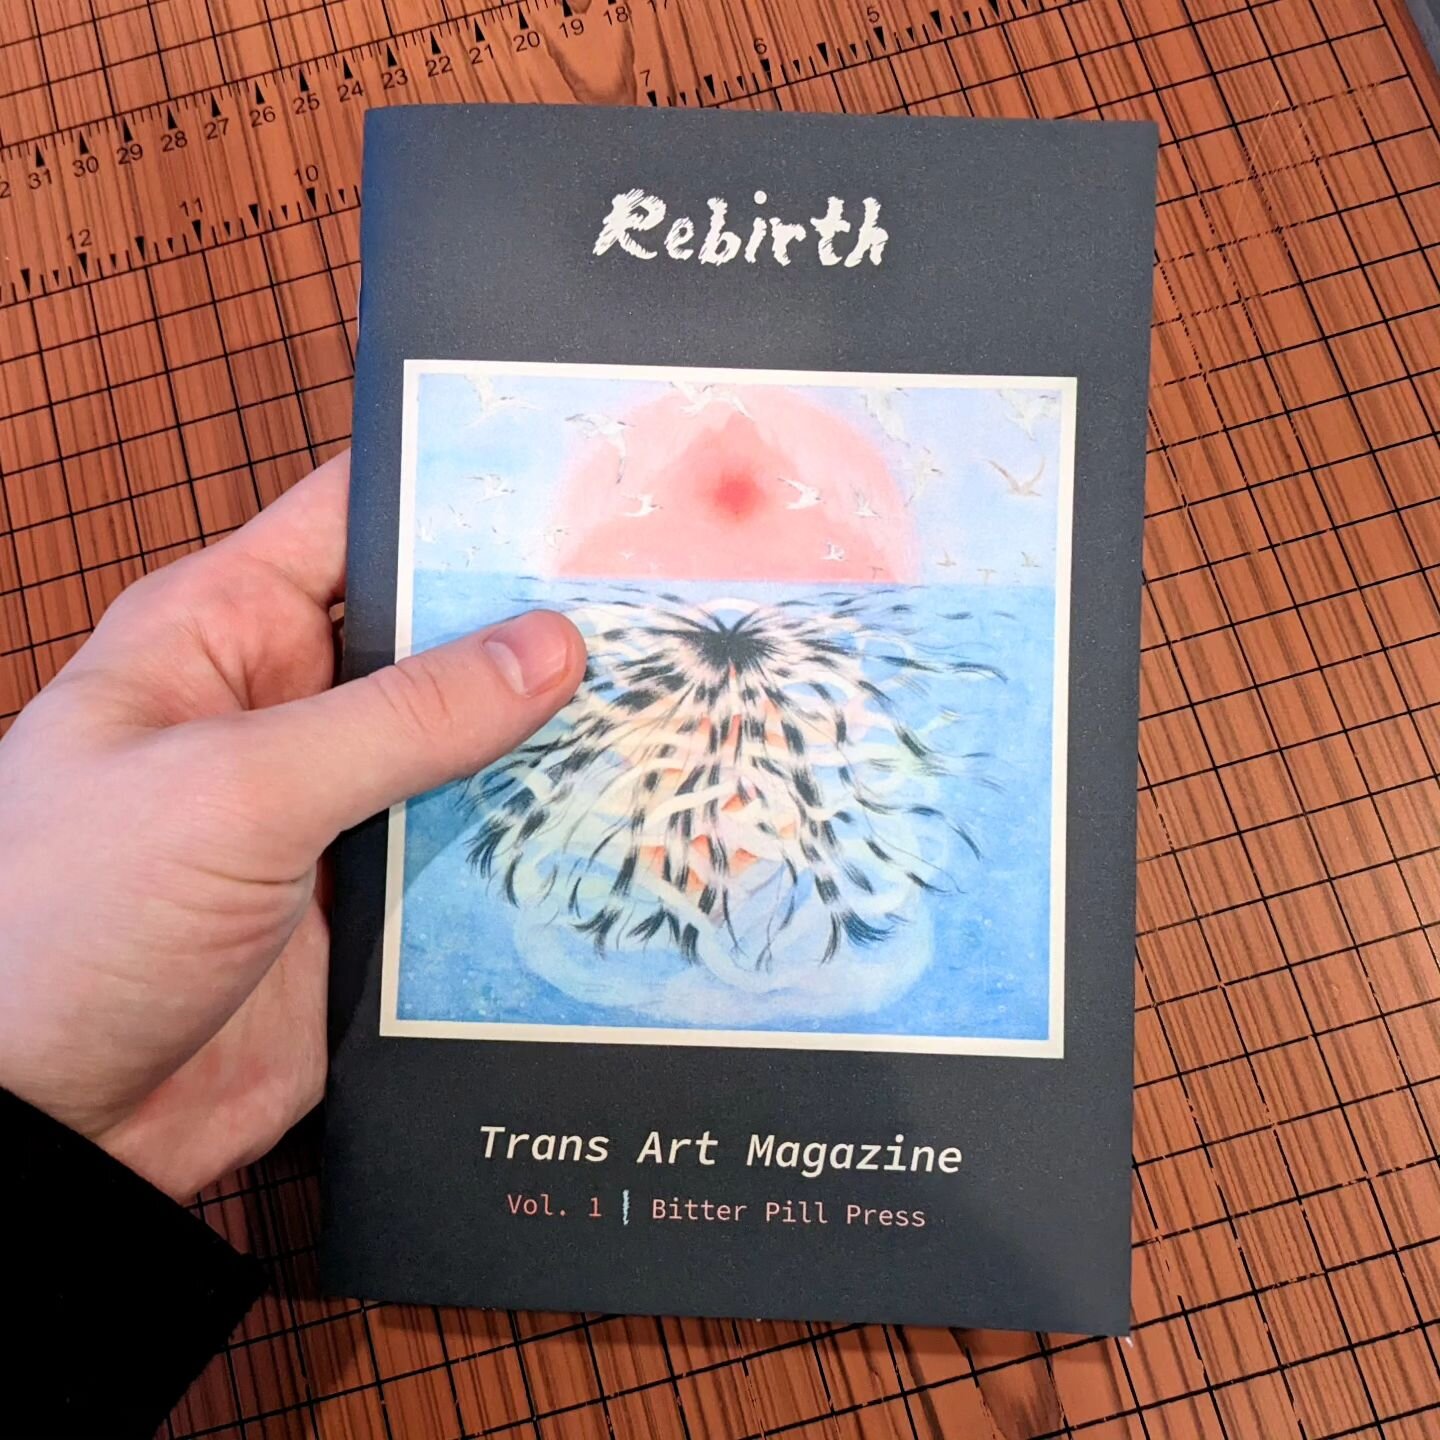 Trans Art Magazine: Rebirth is OUT NOW! 🌱

Here's just a bit of a look at the content of the zine, plus all the artists with work in it! 

LINK IN BIO to get a print or digital copy (OR get it with April's delivery if you're a zine subscriber) 💌✨

